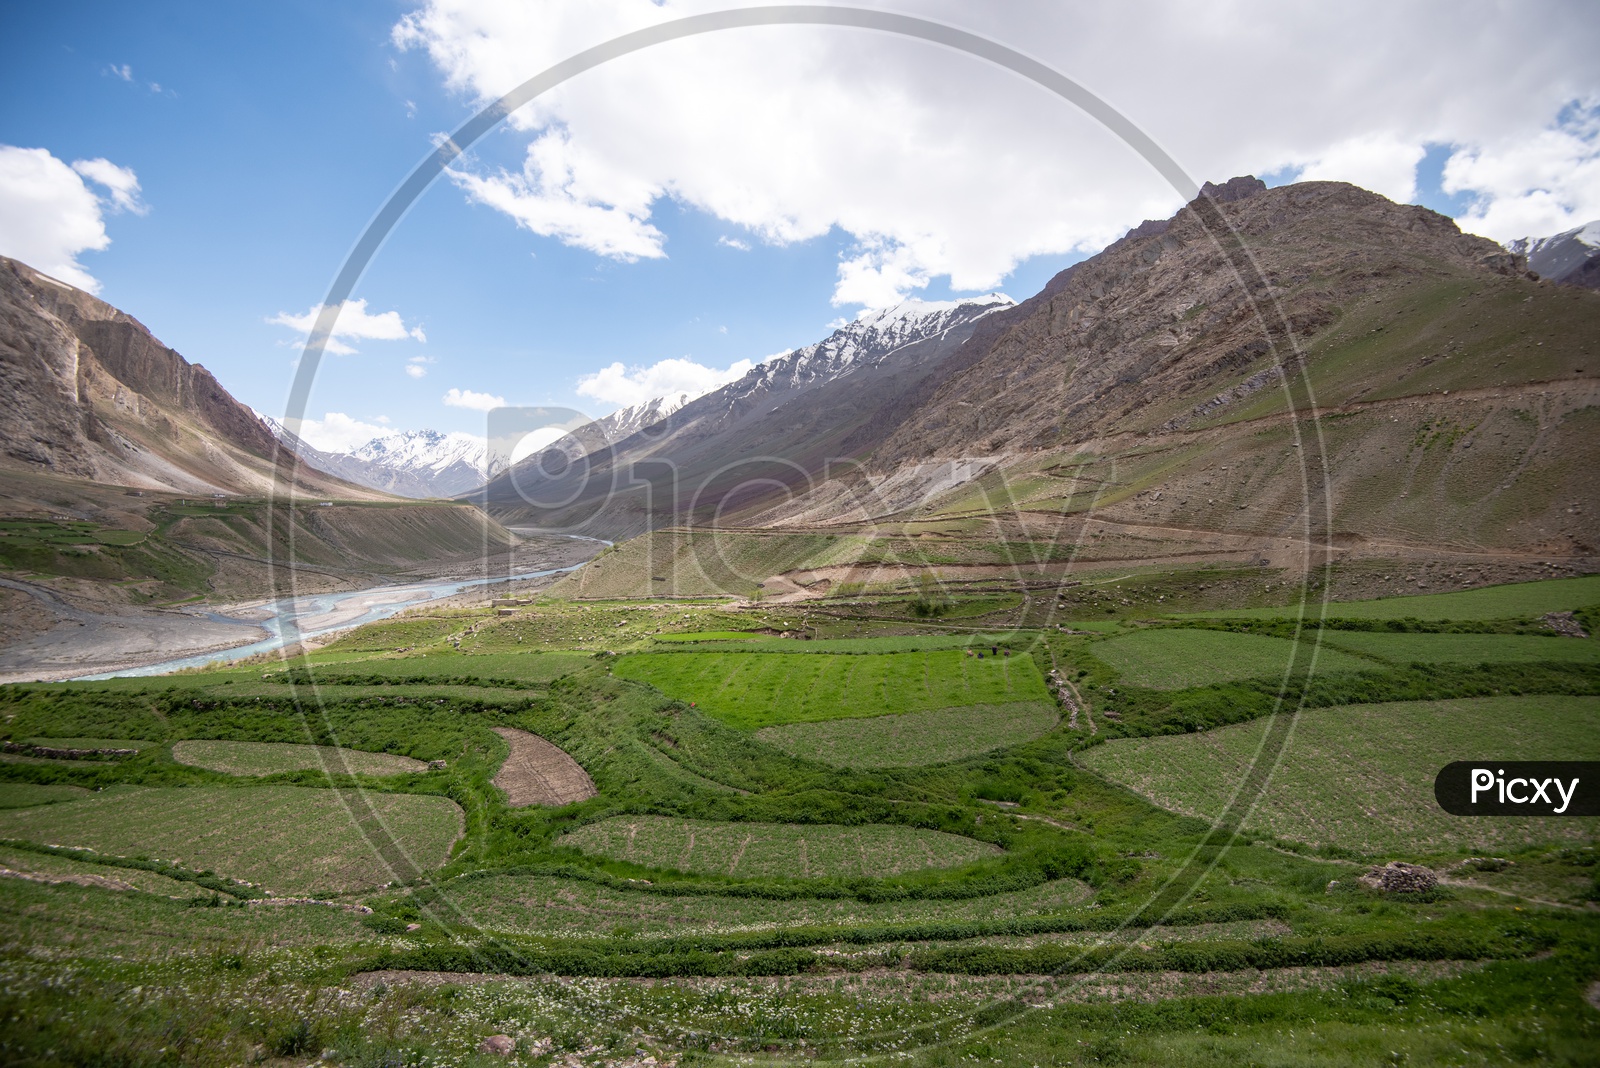 Snow capped Mountains of Spiti Valley with agriculture fields in foreground